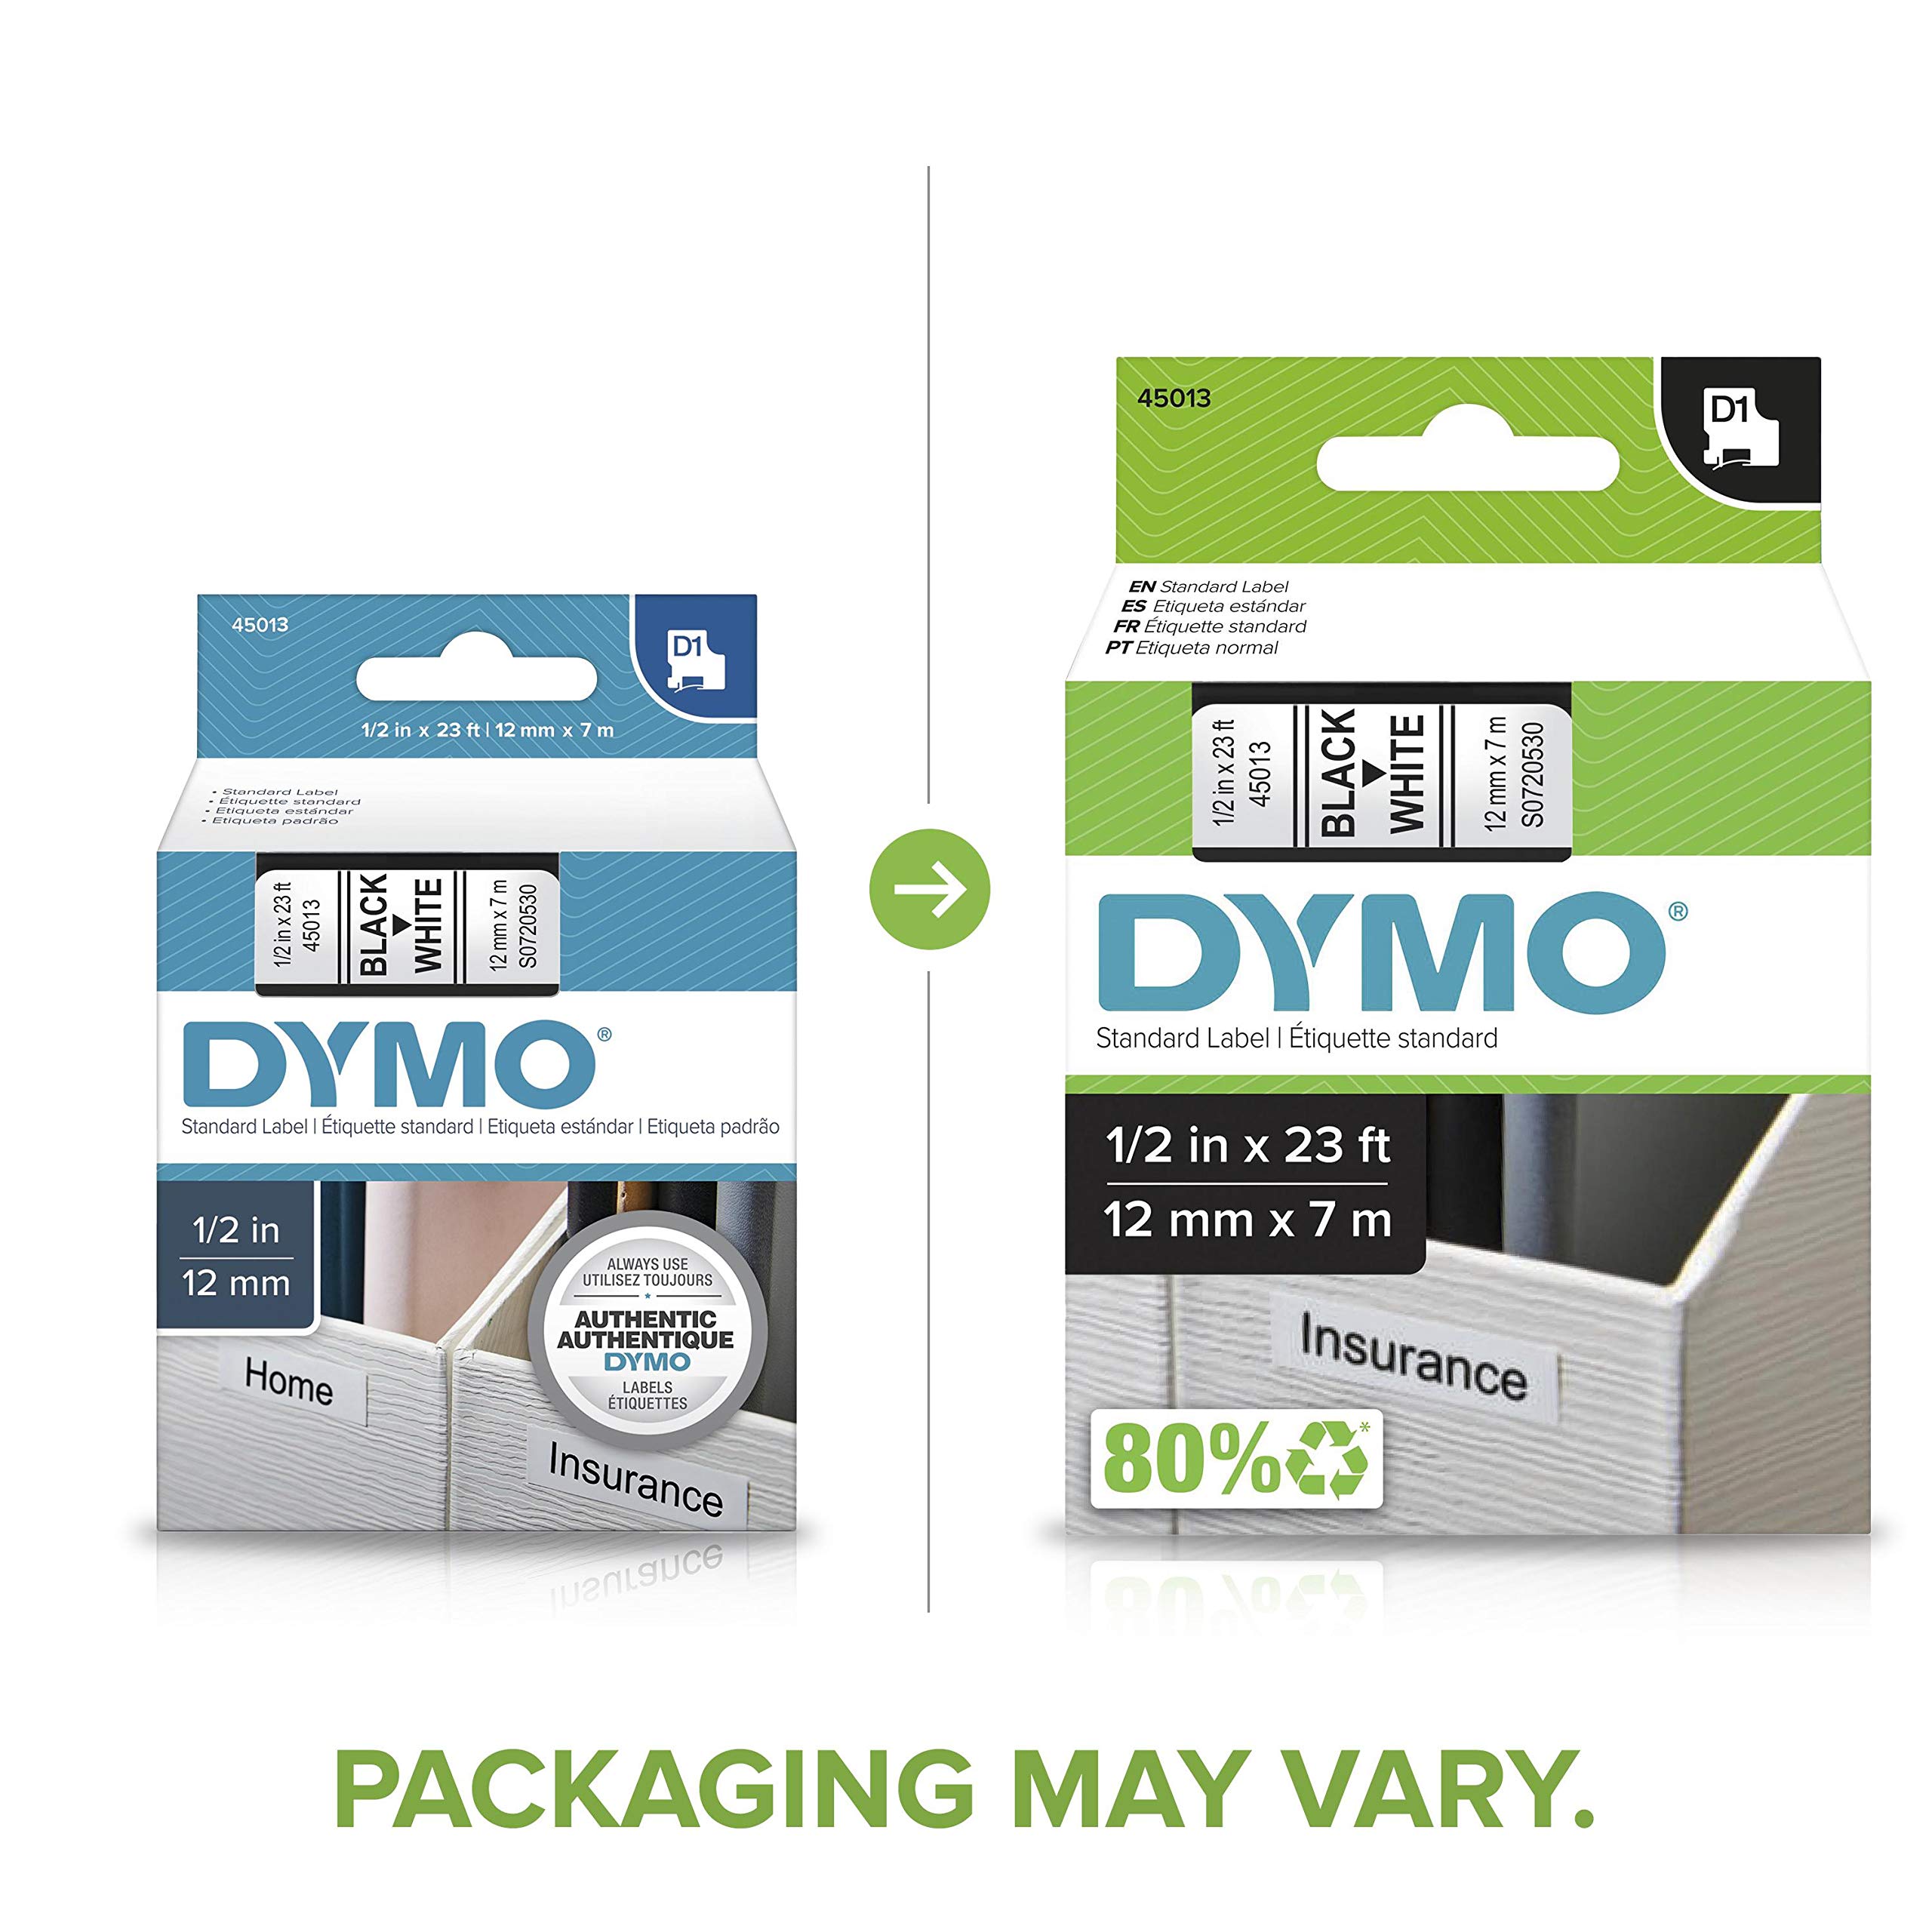 DYMO Standard D1 Labeling Tape for LabelManager Label Makers, Black Print on White Tape, 1/2'' W x 23' L, 1 catridge (45013)